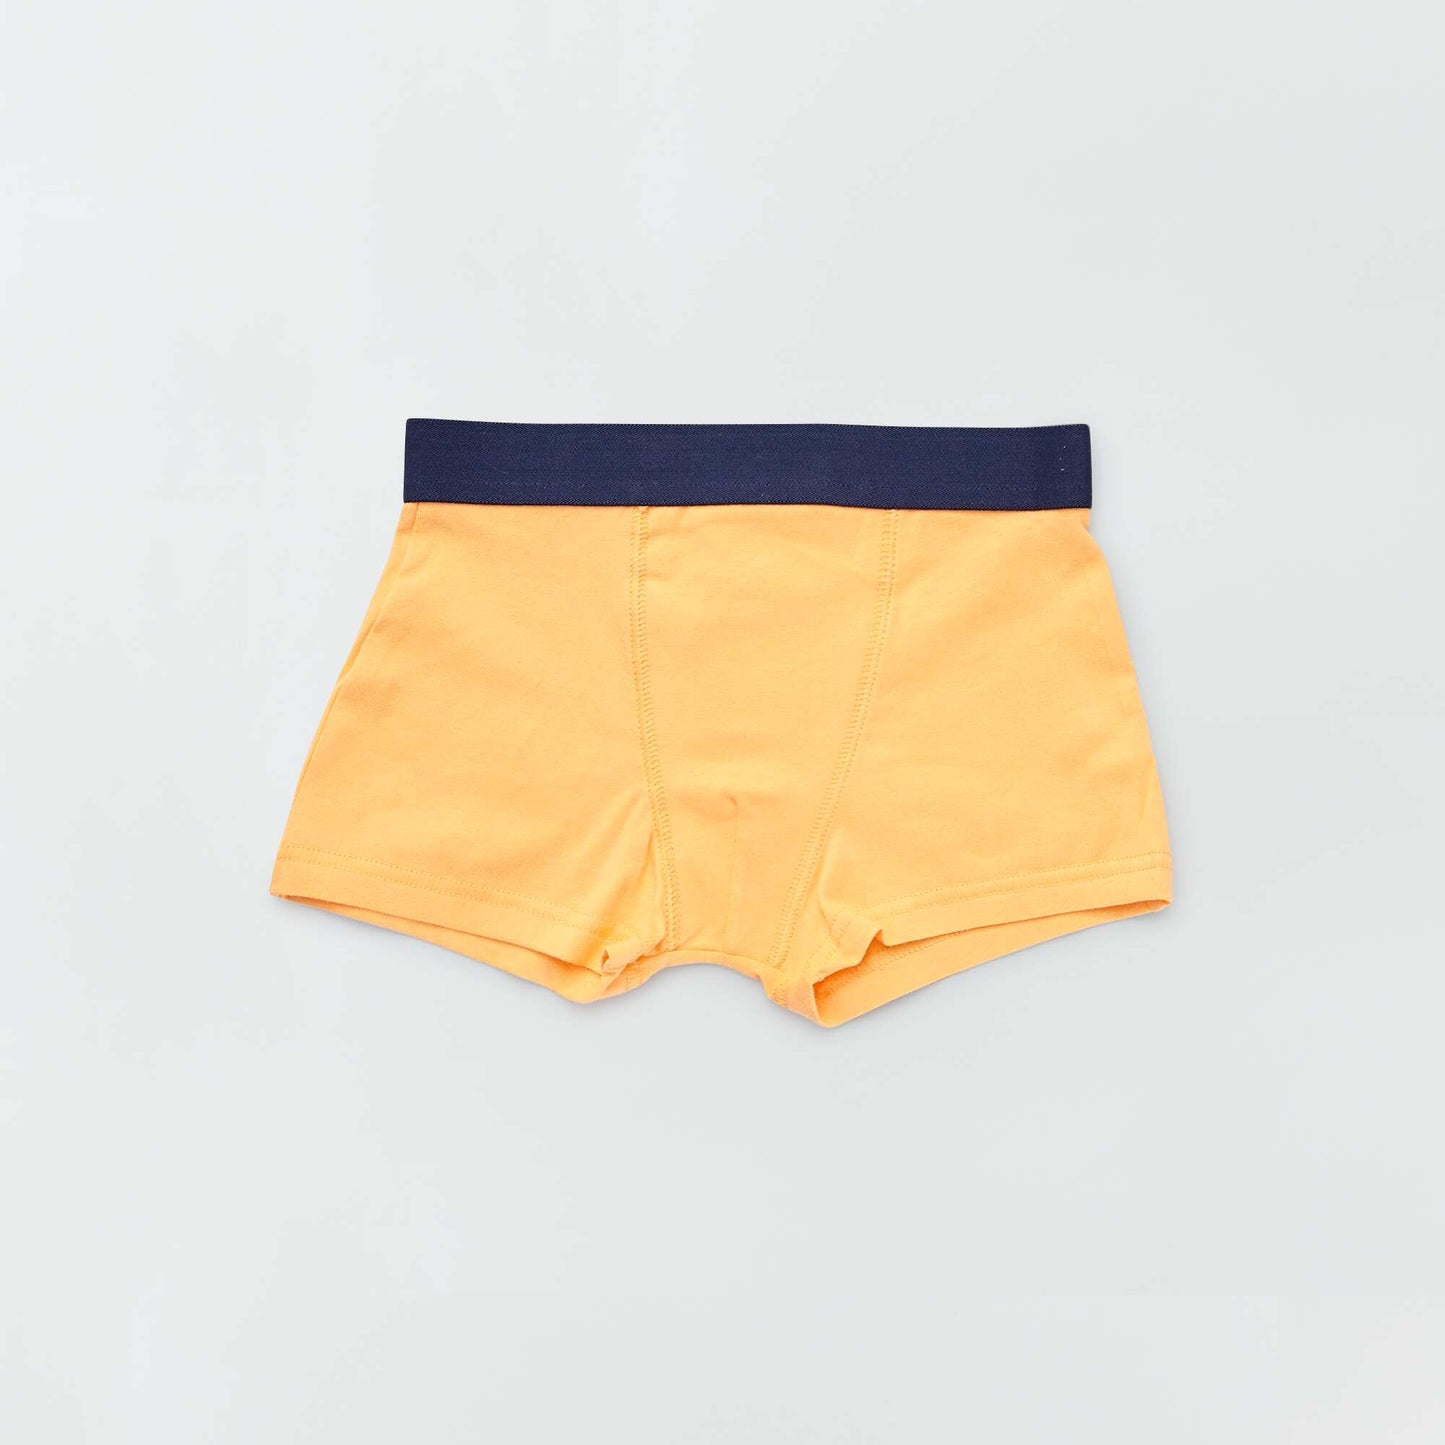 Pack of 3 pairs of boxer shorts BLUE